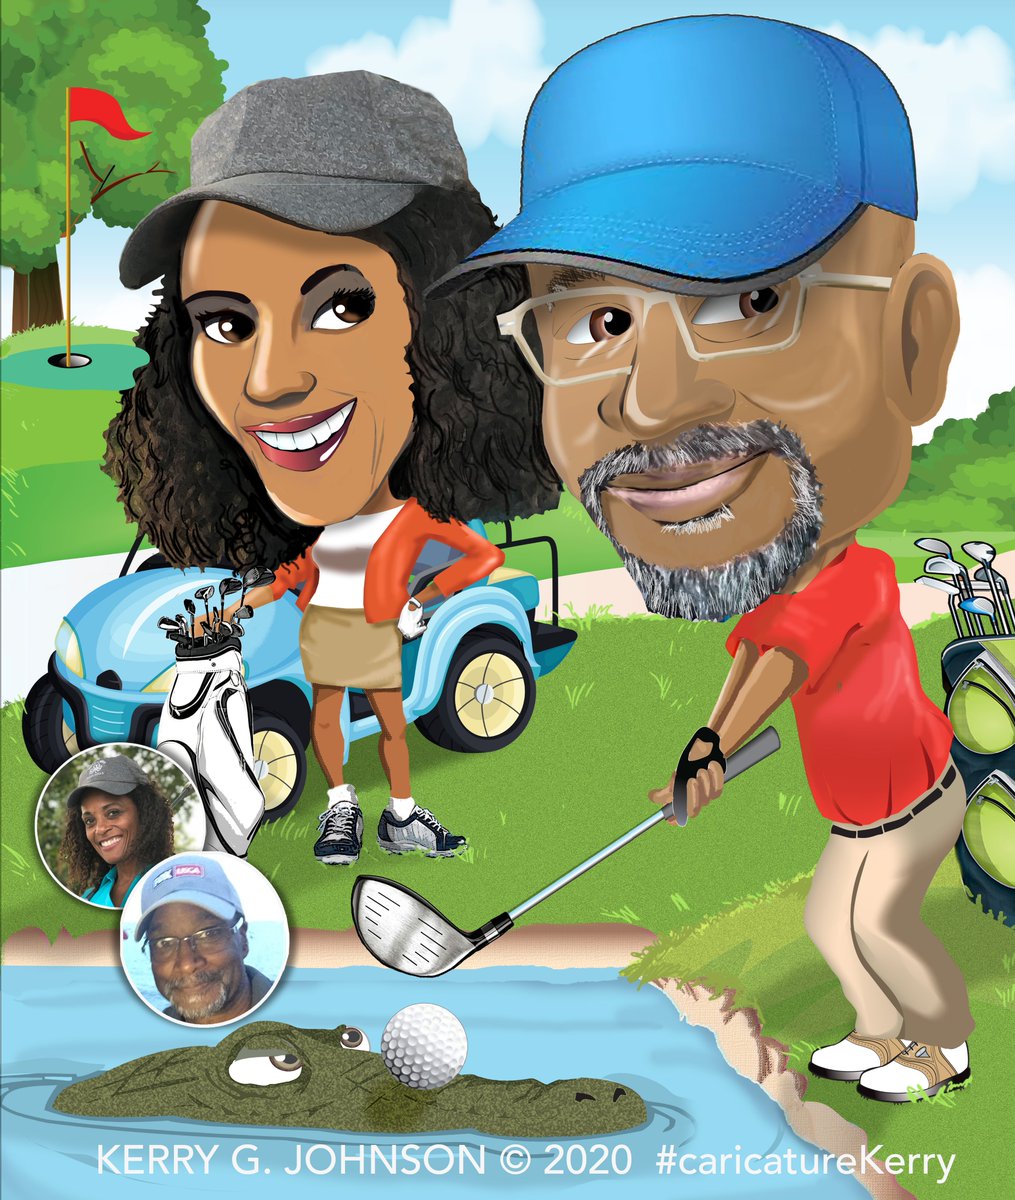 A colorful #digitalcaricature for two top-notch #AfricanAmericanGolfers enjoying an afternoon at the course. #caricaturedrawings #birthdaycaricature #corporatecaricatures #golferslife #golfaddict #golfergifts #BlackGolfers #caricaturegifts #caricatures | instagram.com/p/B8oXVcRB-EA/…